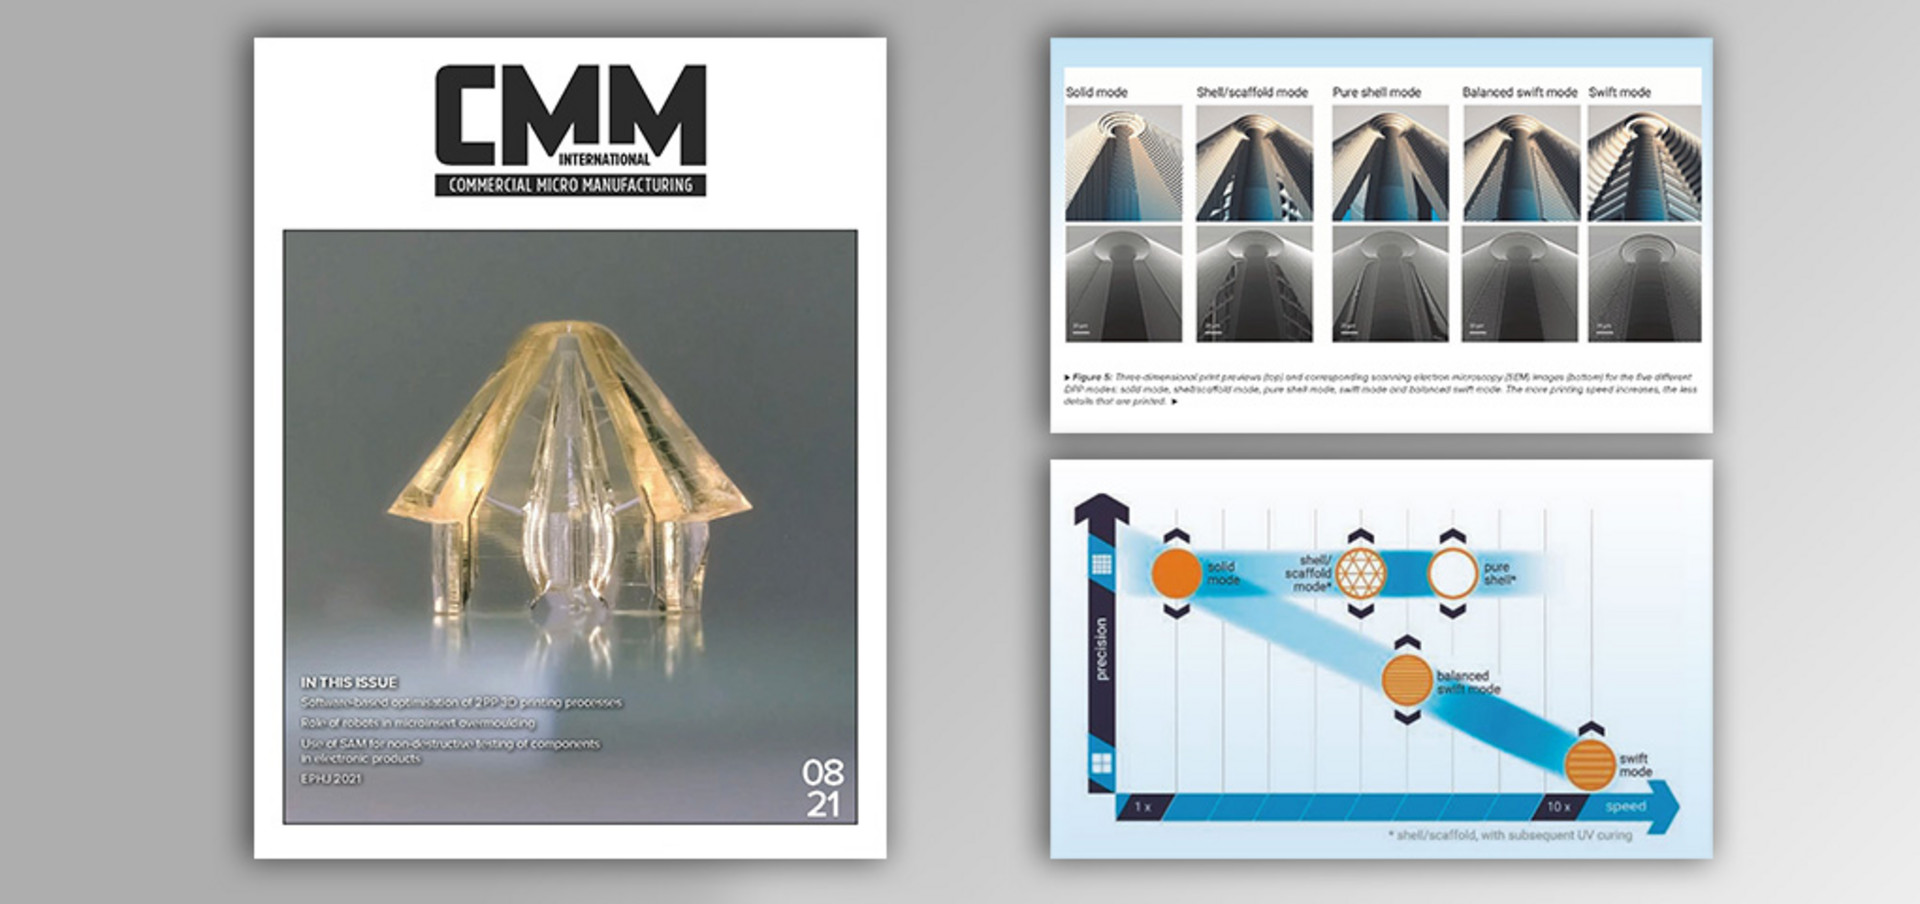 Nanoscribe features cover and article in the August issue of CMM magazine